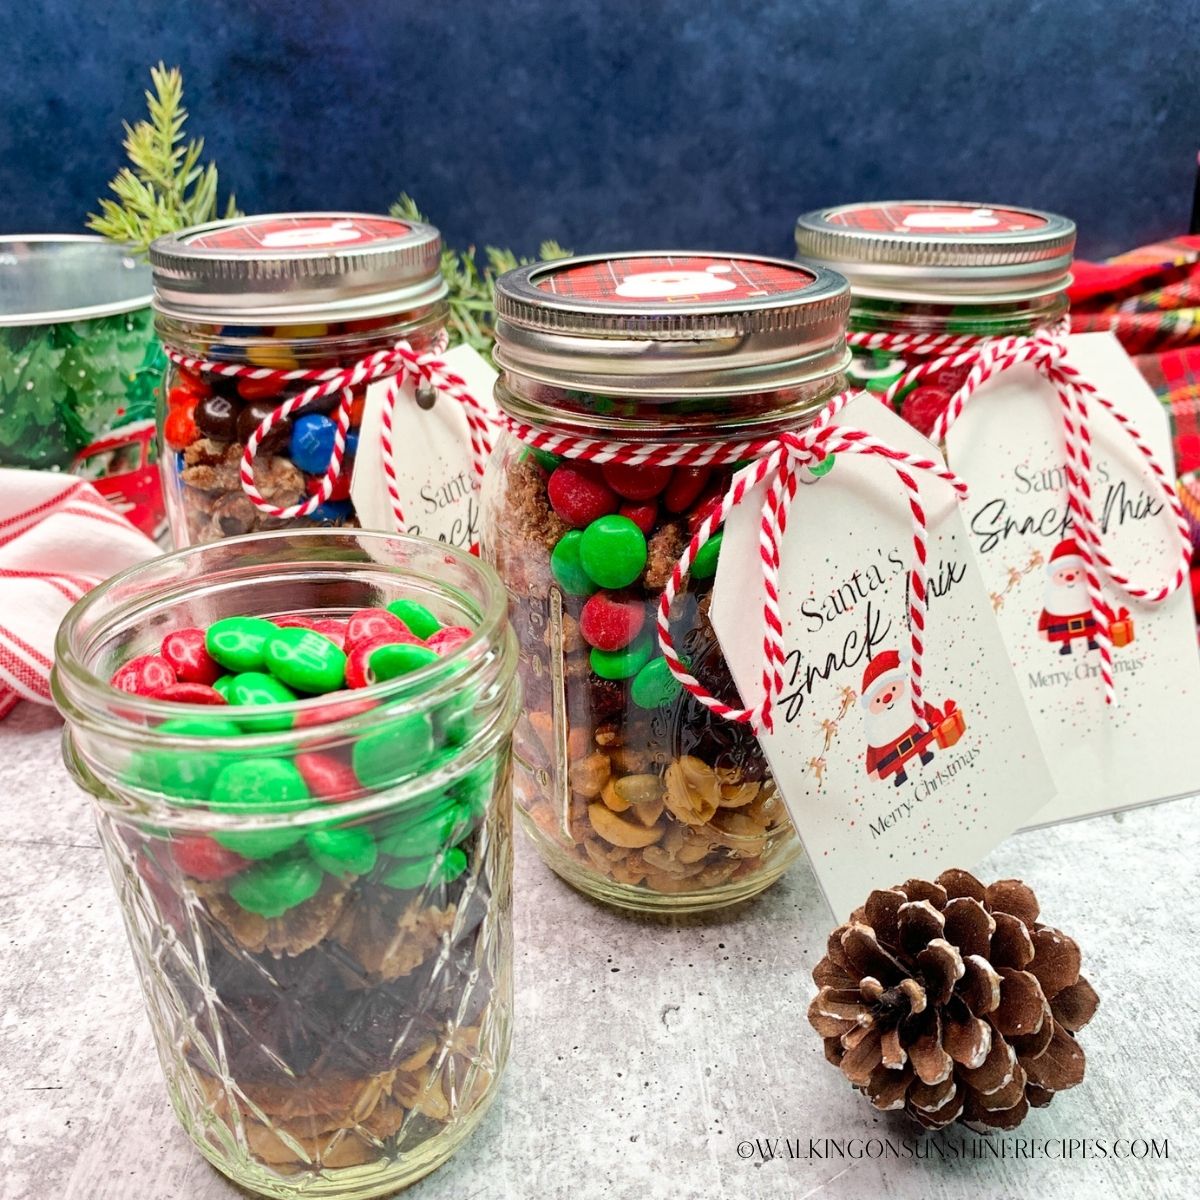 Christmas Snack Mix in a Jar